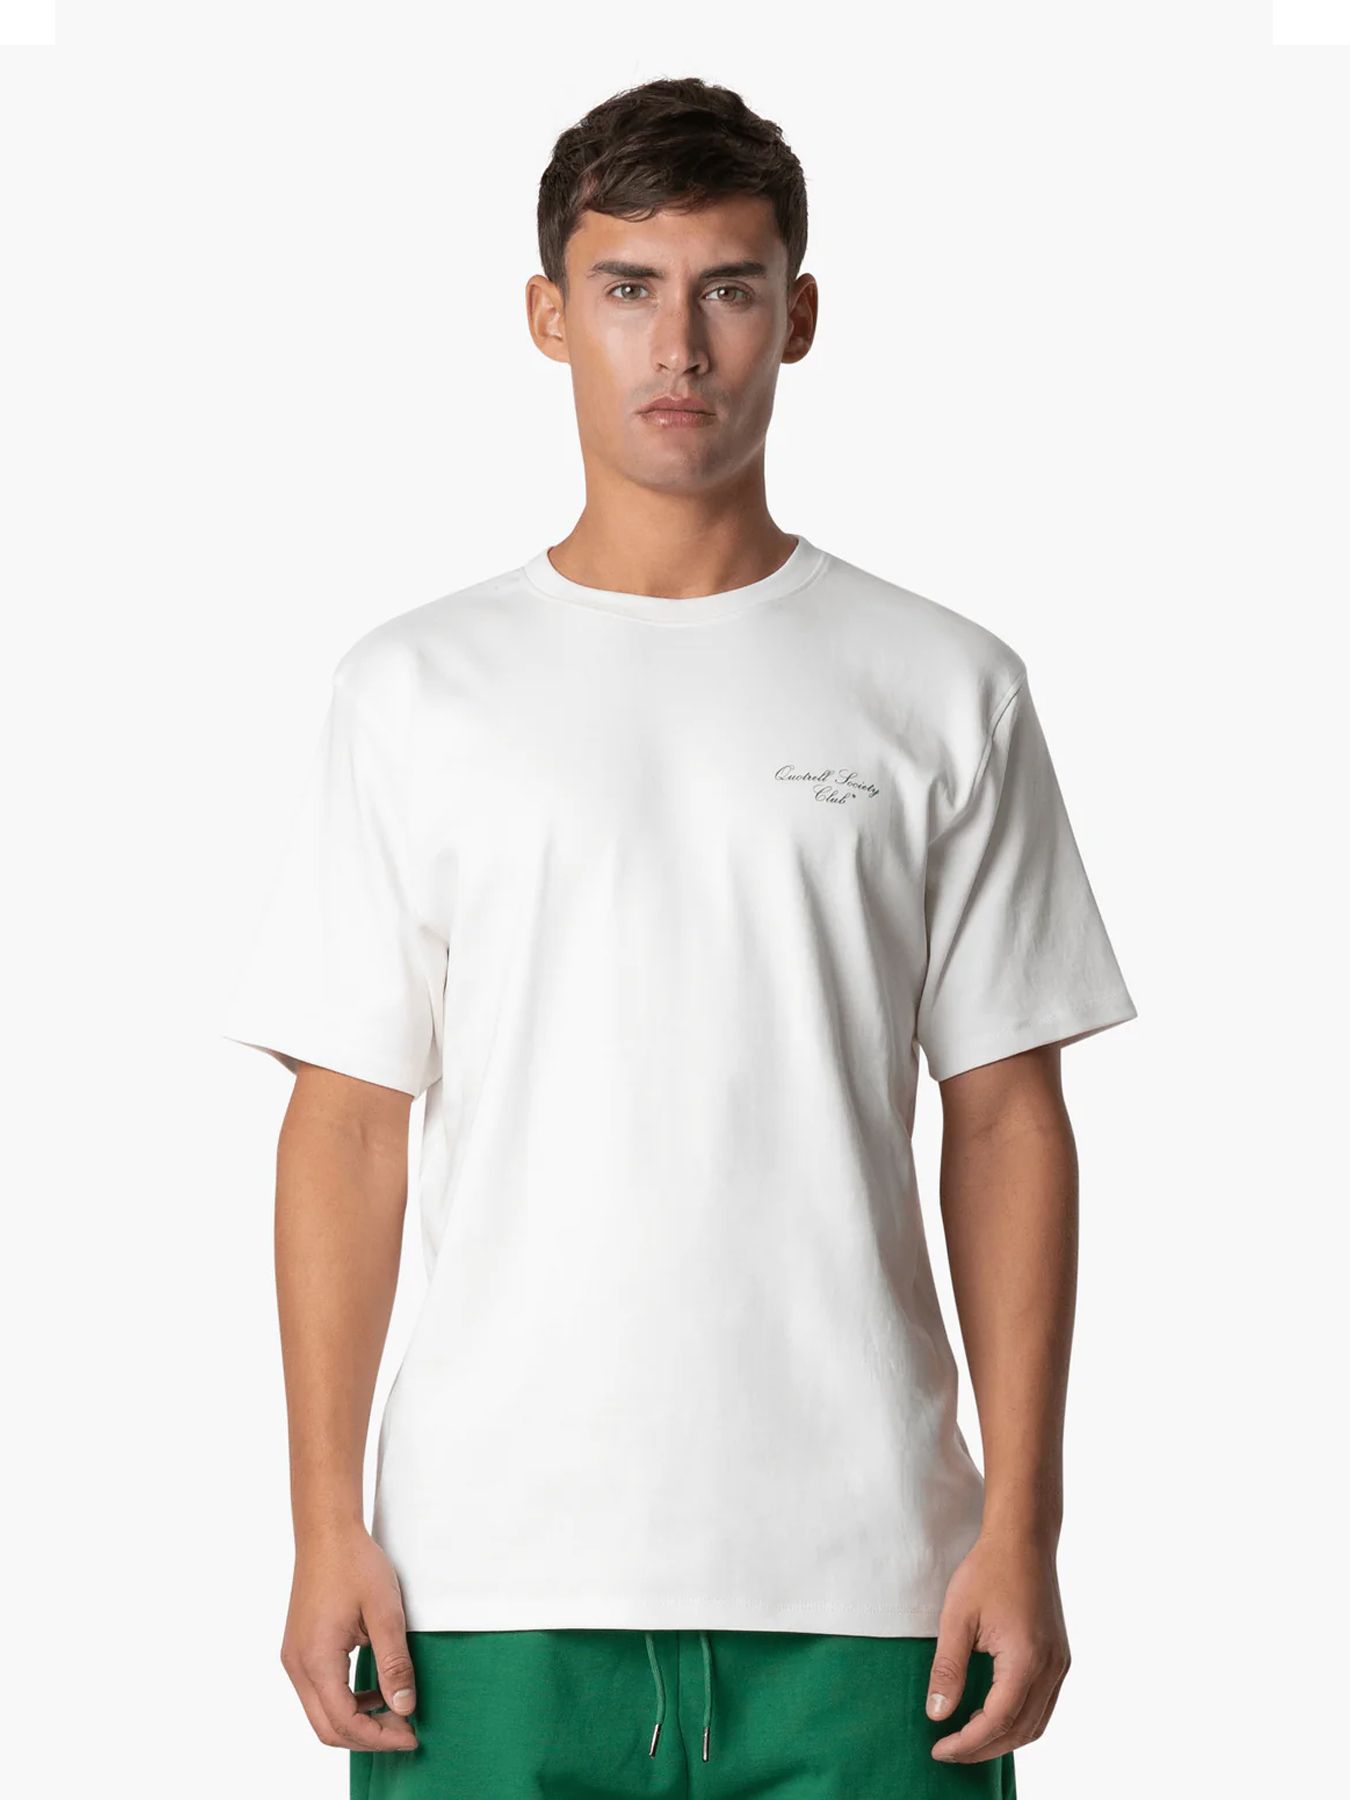 Quotrell Society club t-shirt Off White/green 2900147484061